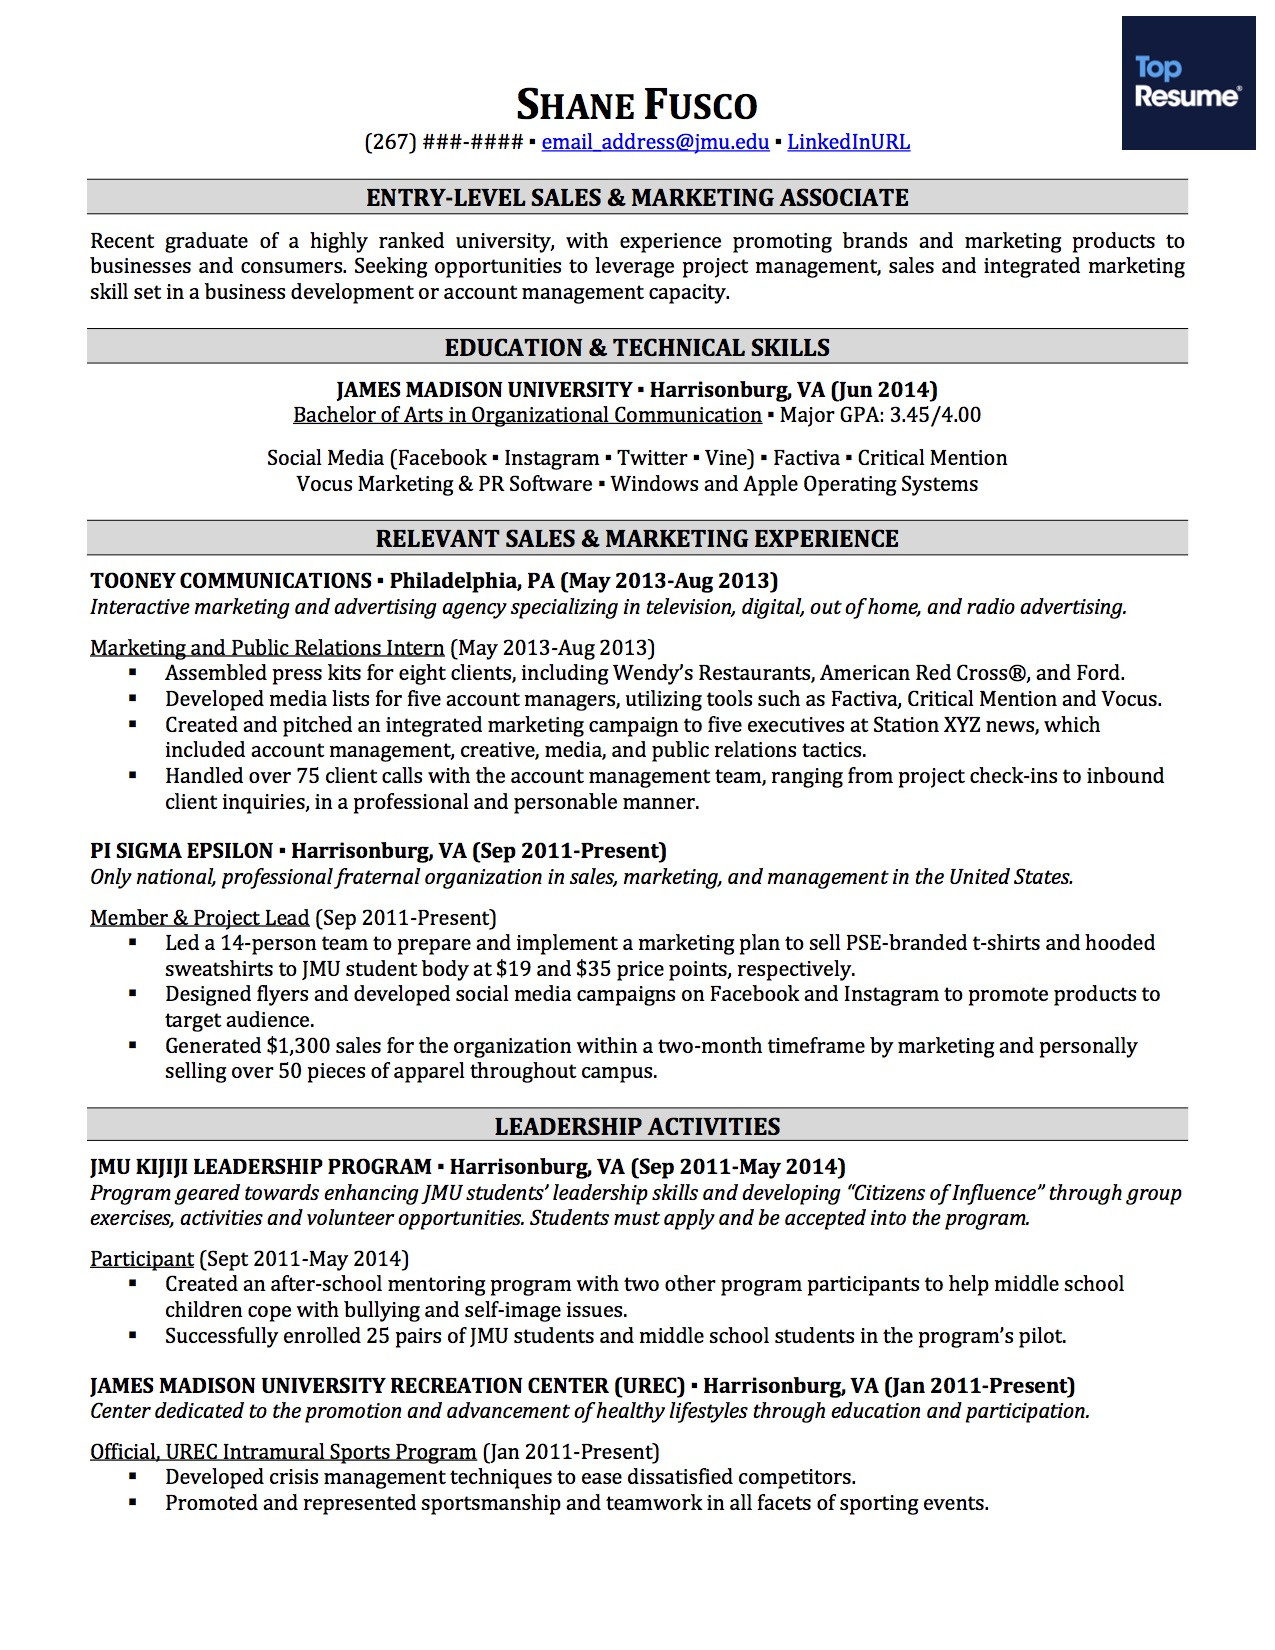 Sample Resume for Non It Job How to Make A Great Resume with No Experience topresume